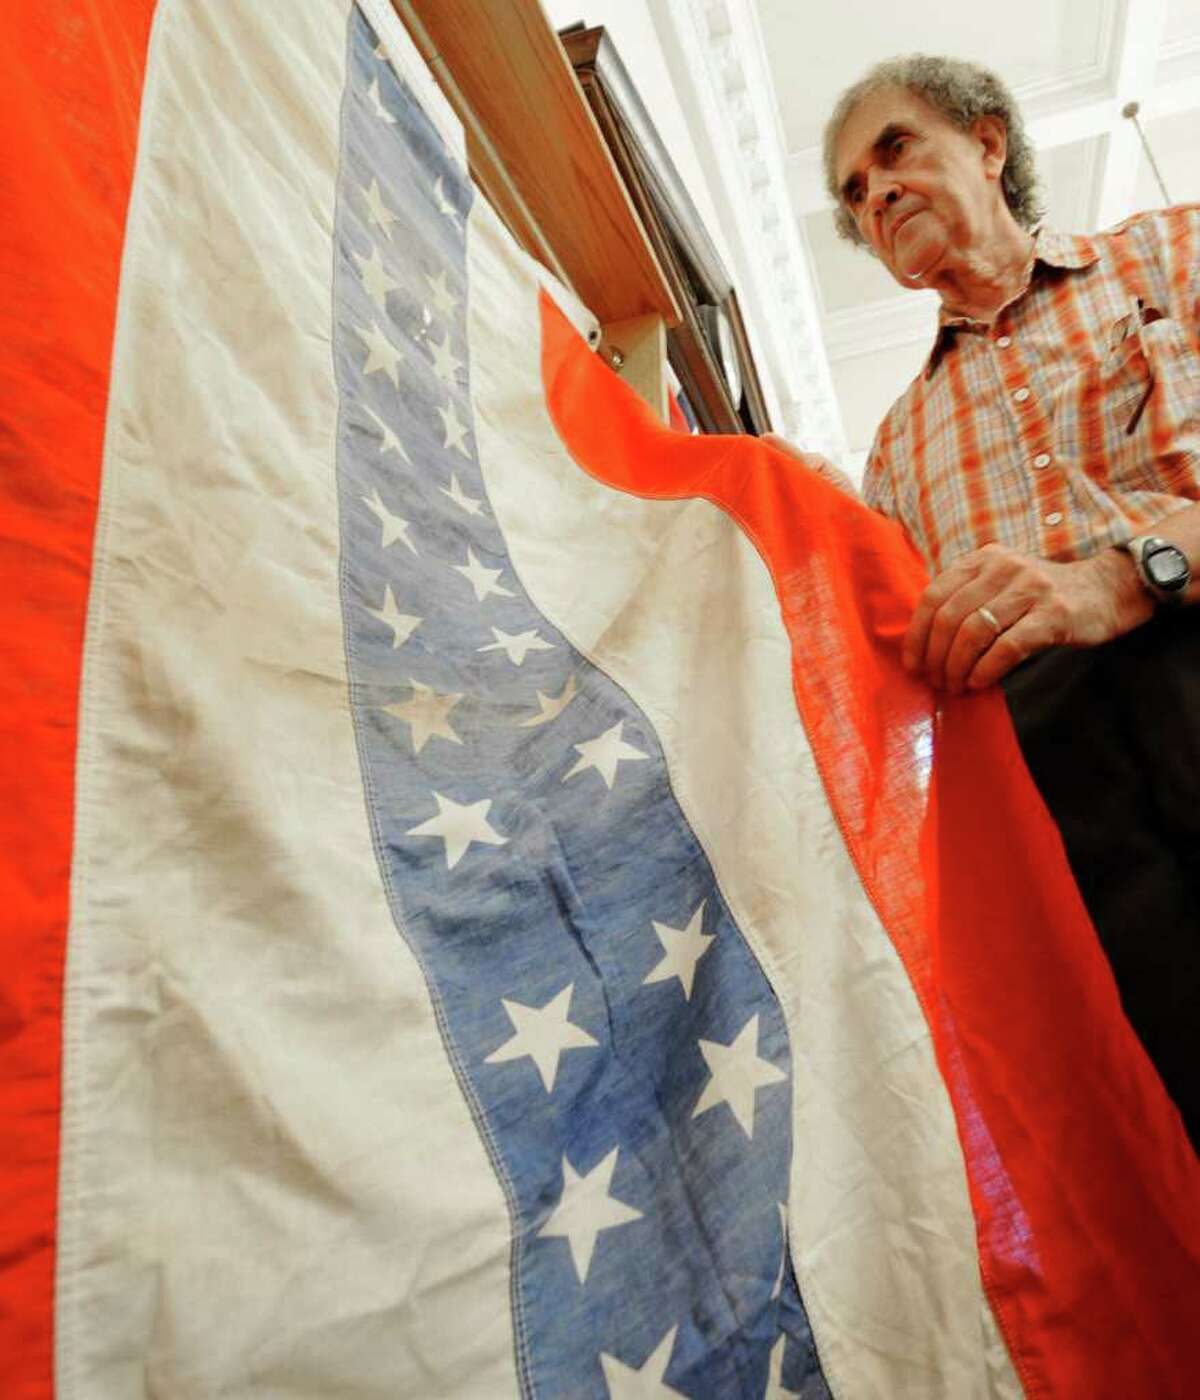 Flag collector Ron Soucy holds a 34 star banner at the Watervliet Historical Society building in Watervliet, N.Y. June 30, 2011. (Skip Dickstein / Times Union)